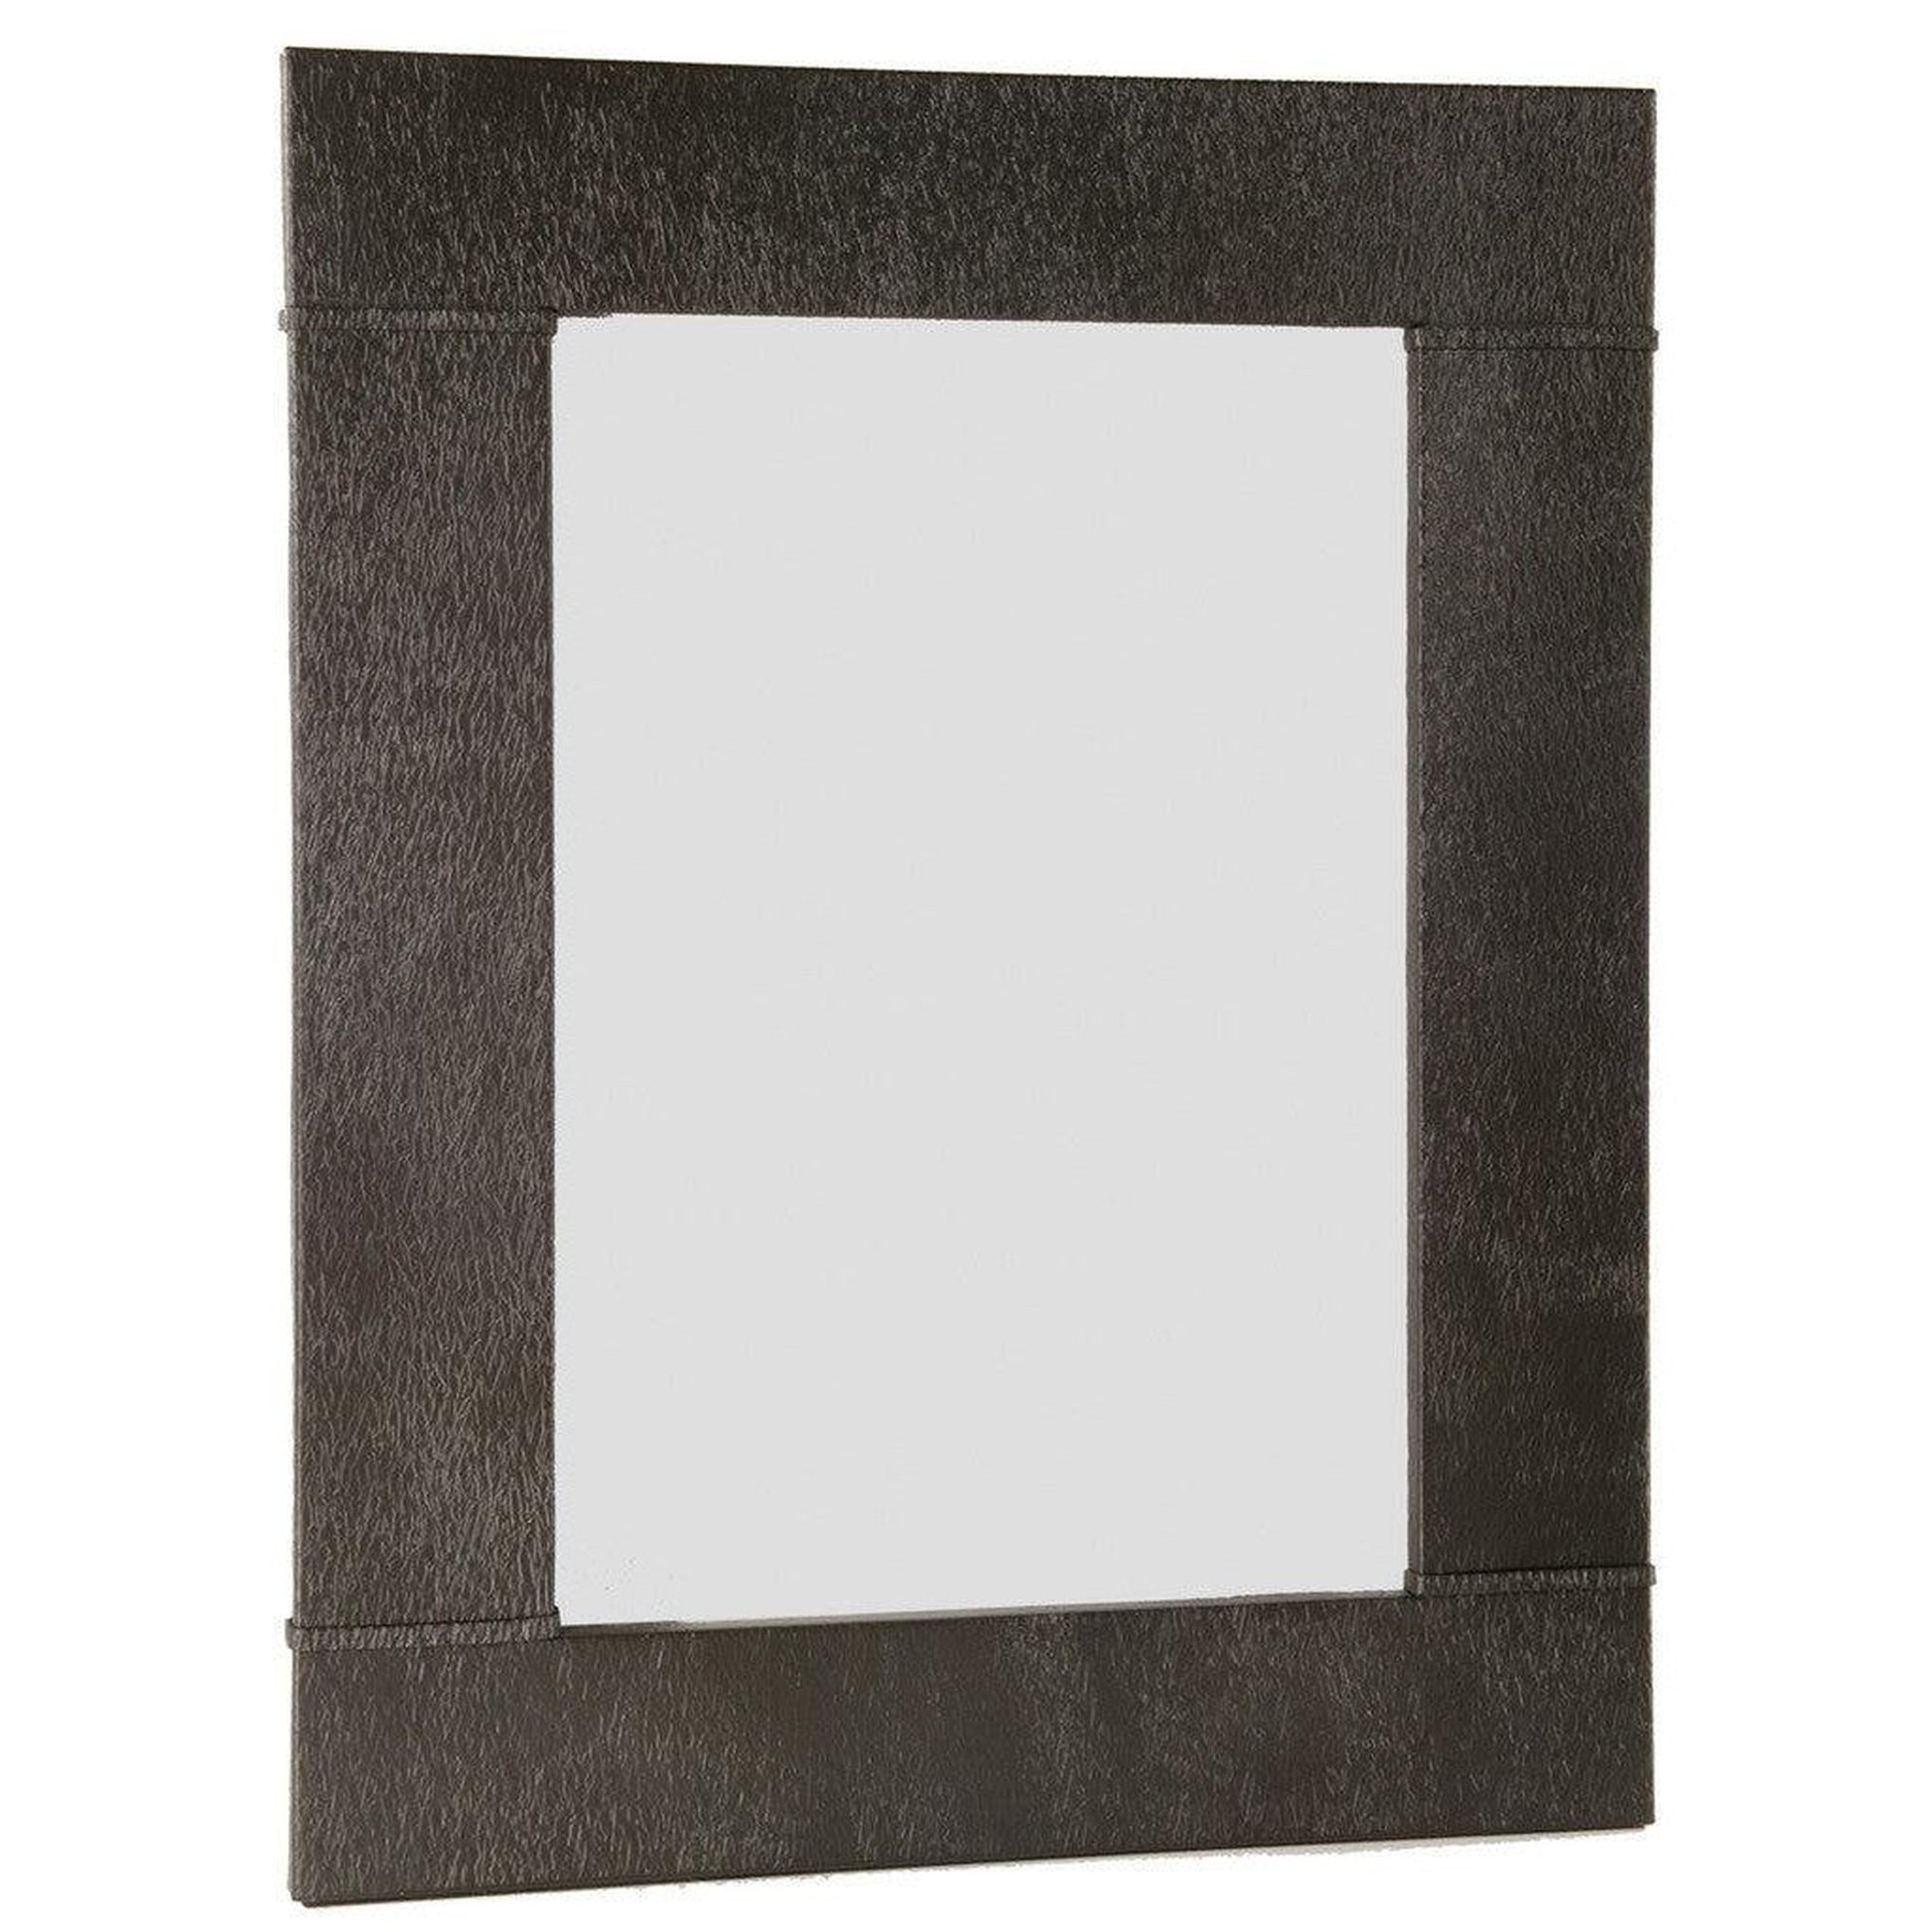 Stone County Ironworks Cedarvale 37" x 45" Large Hand Rubbed Ivory Iron Wall Mirror With Copper Iron Accent